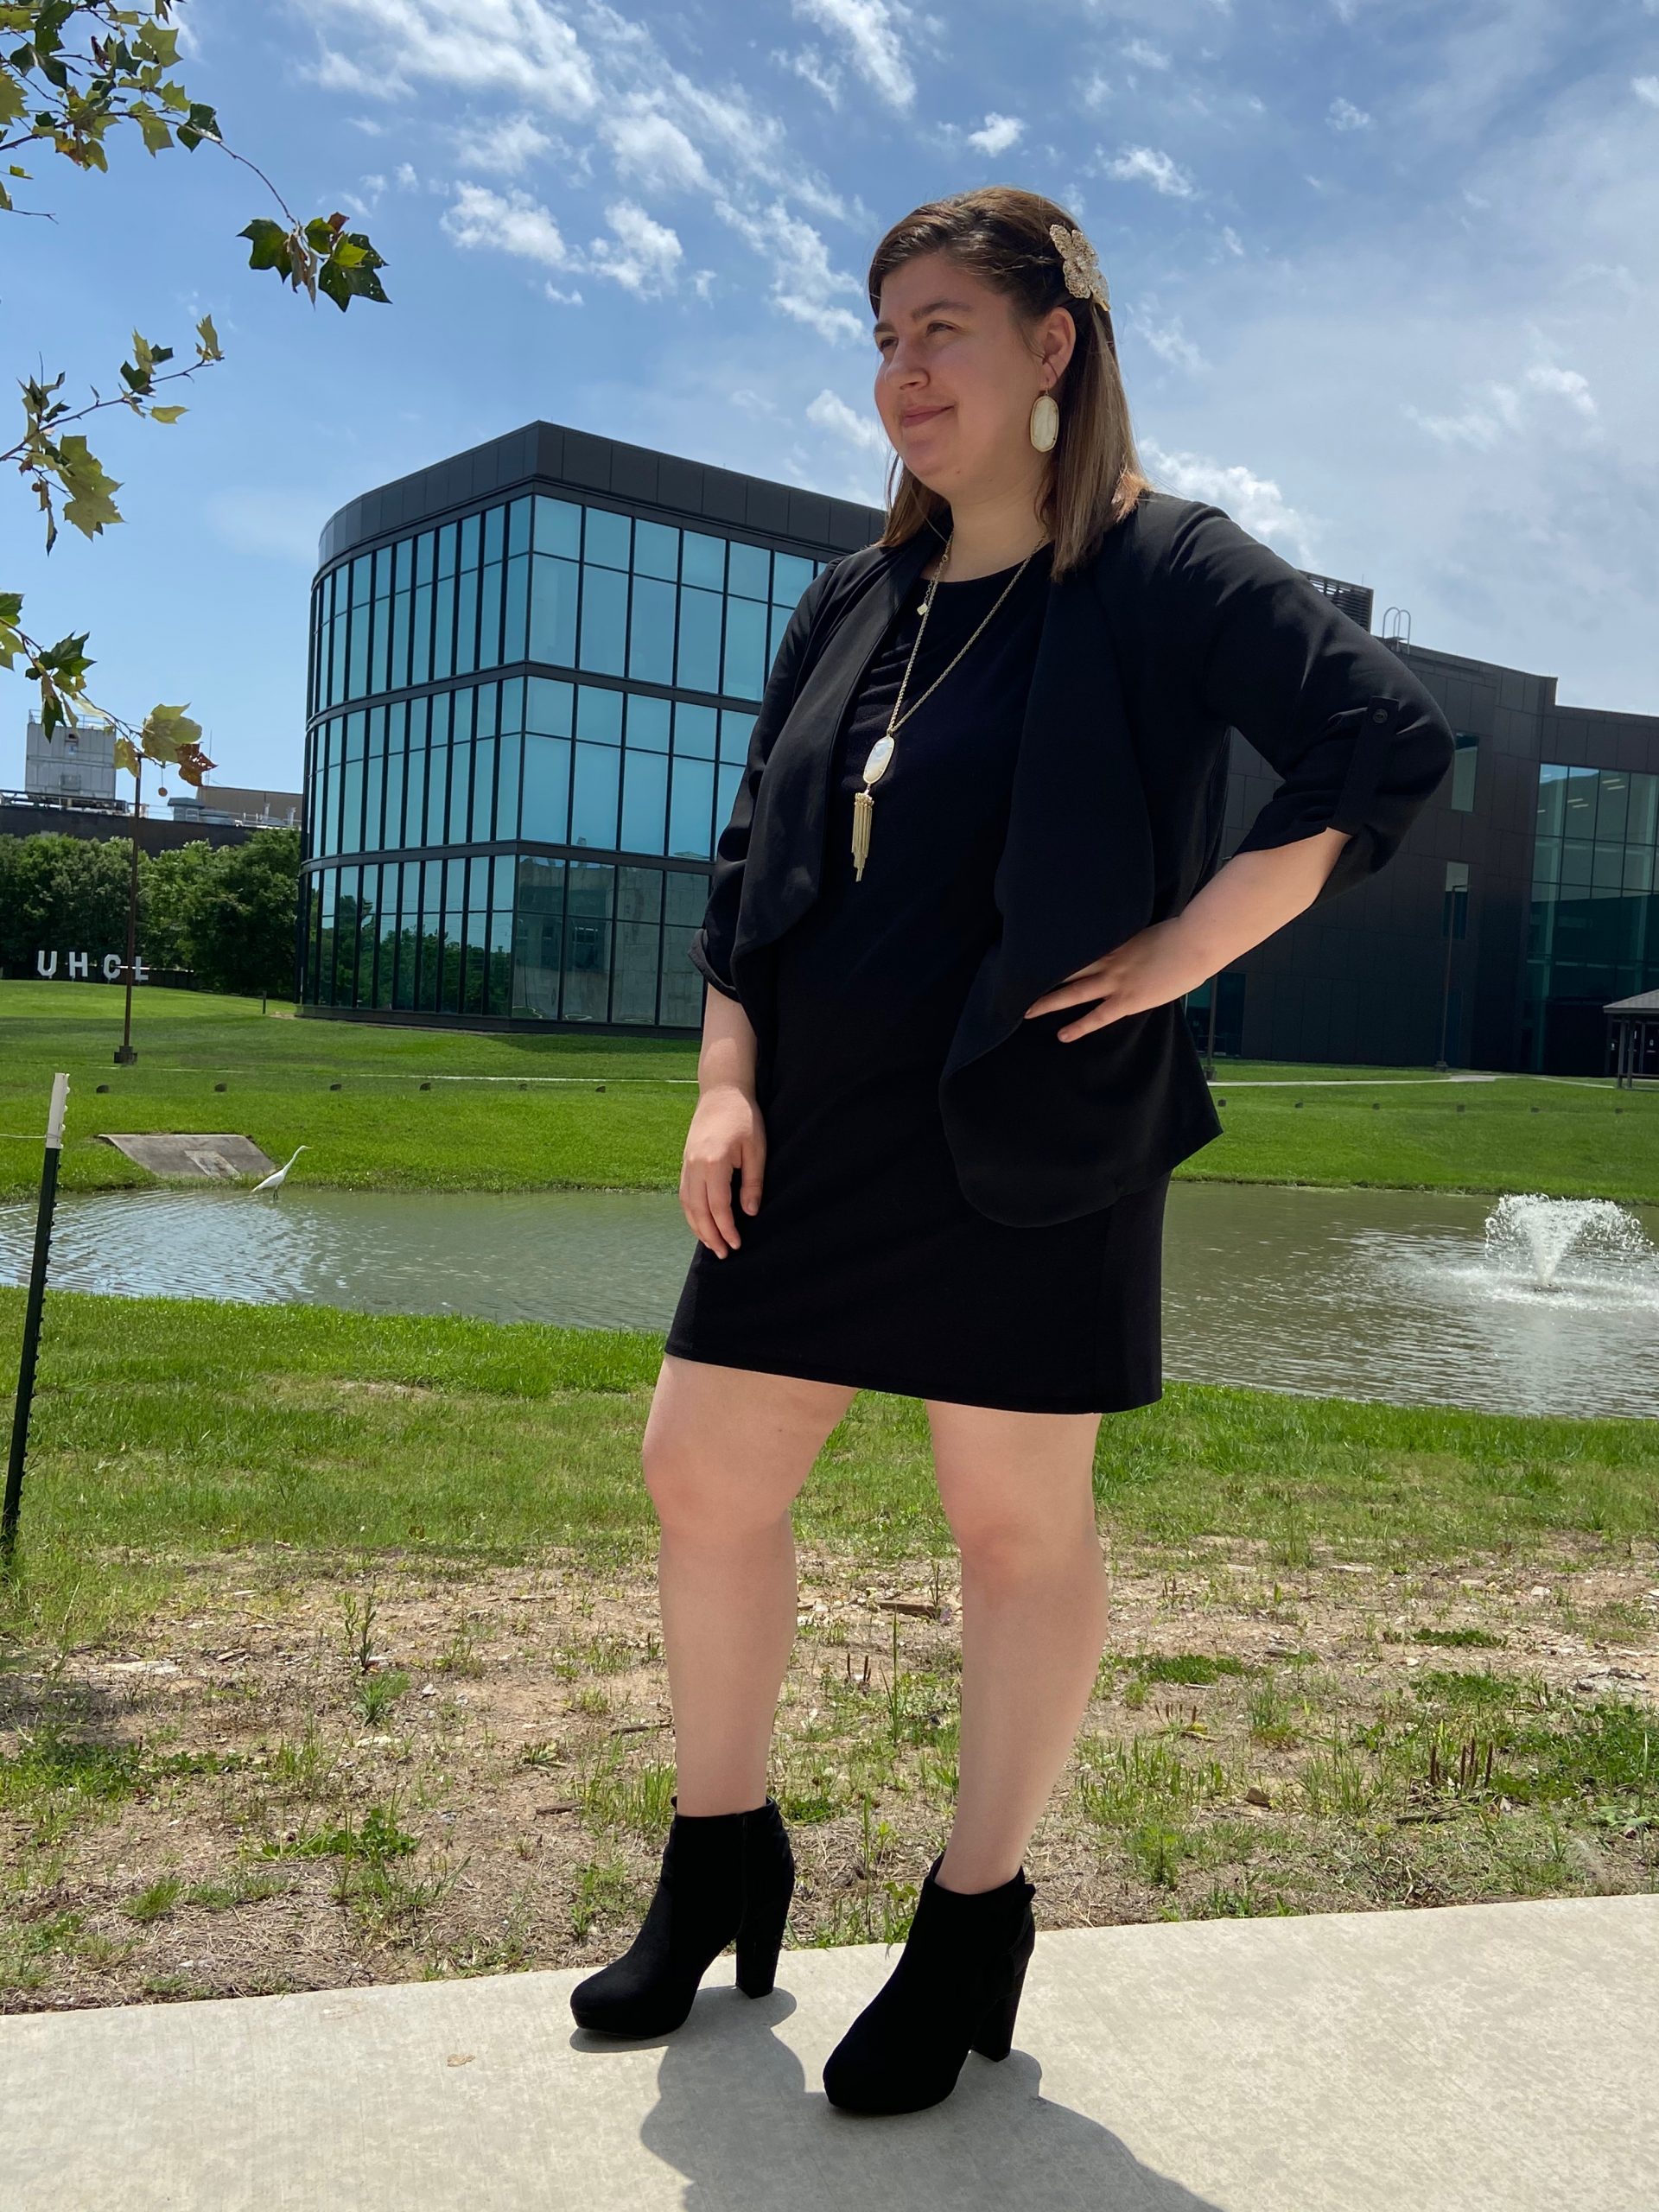 PHOTO: Signal reporter wearing a black dress, blazer, black booties, a necklace, earrings and a hair piece for a formal look. Photo by The Signal reporter Jenna Schaub